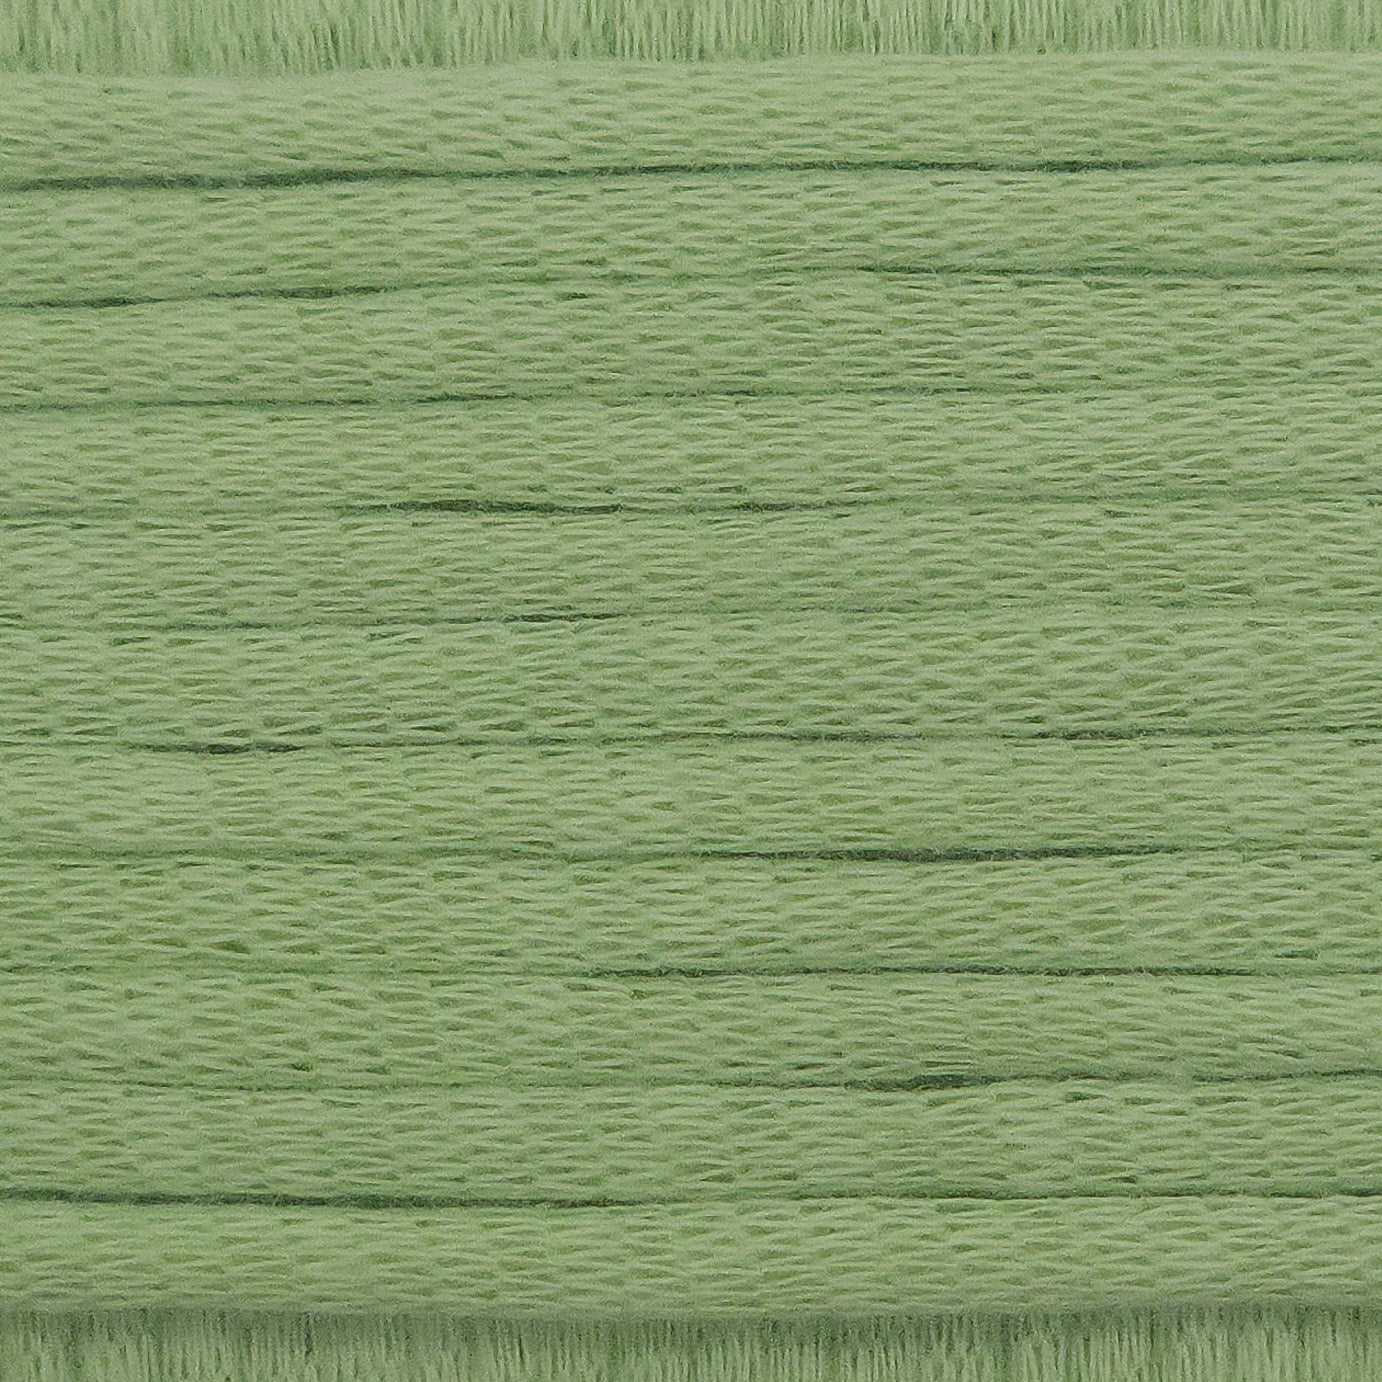 A close-up image showing the texture of a matcha green coloured yarn that is friendly for crochet beginners.